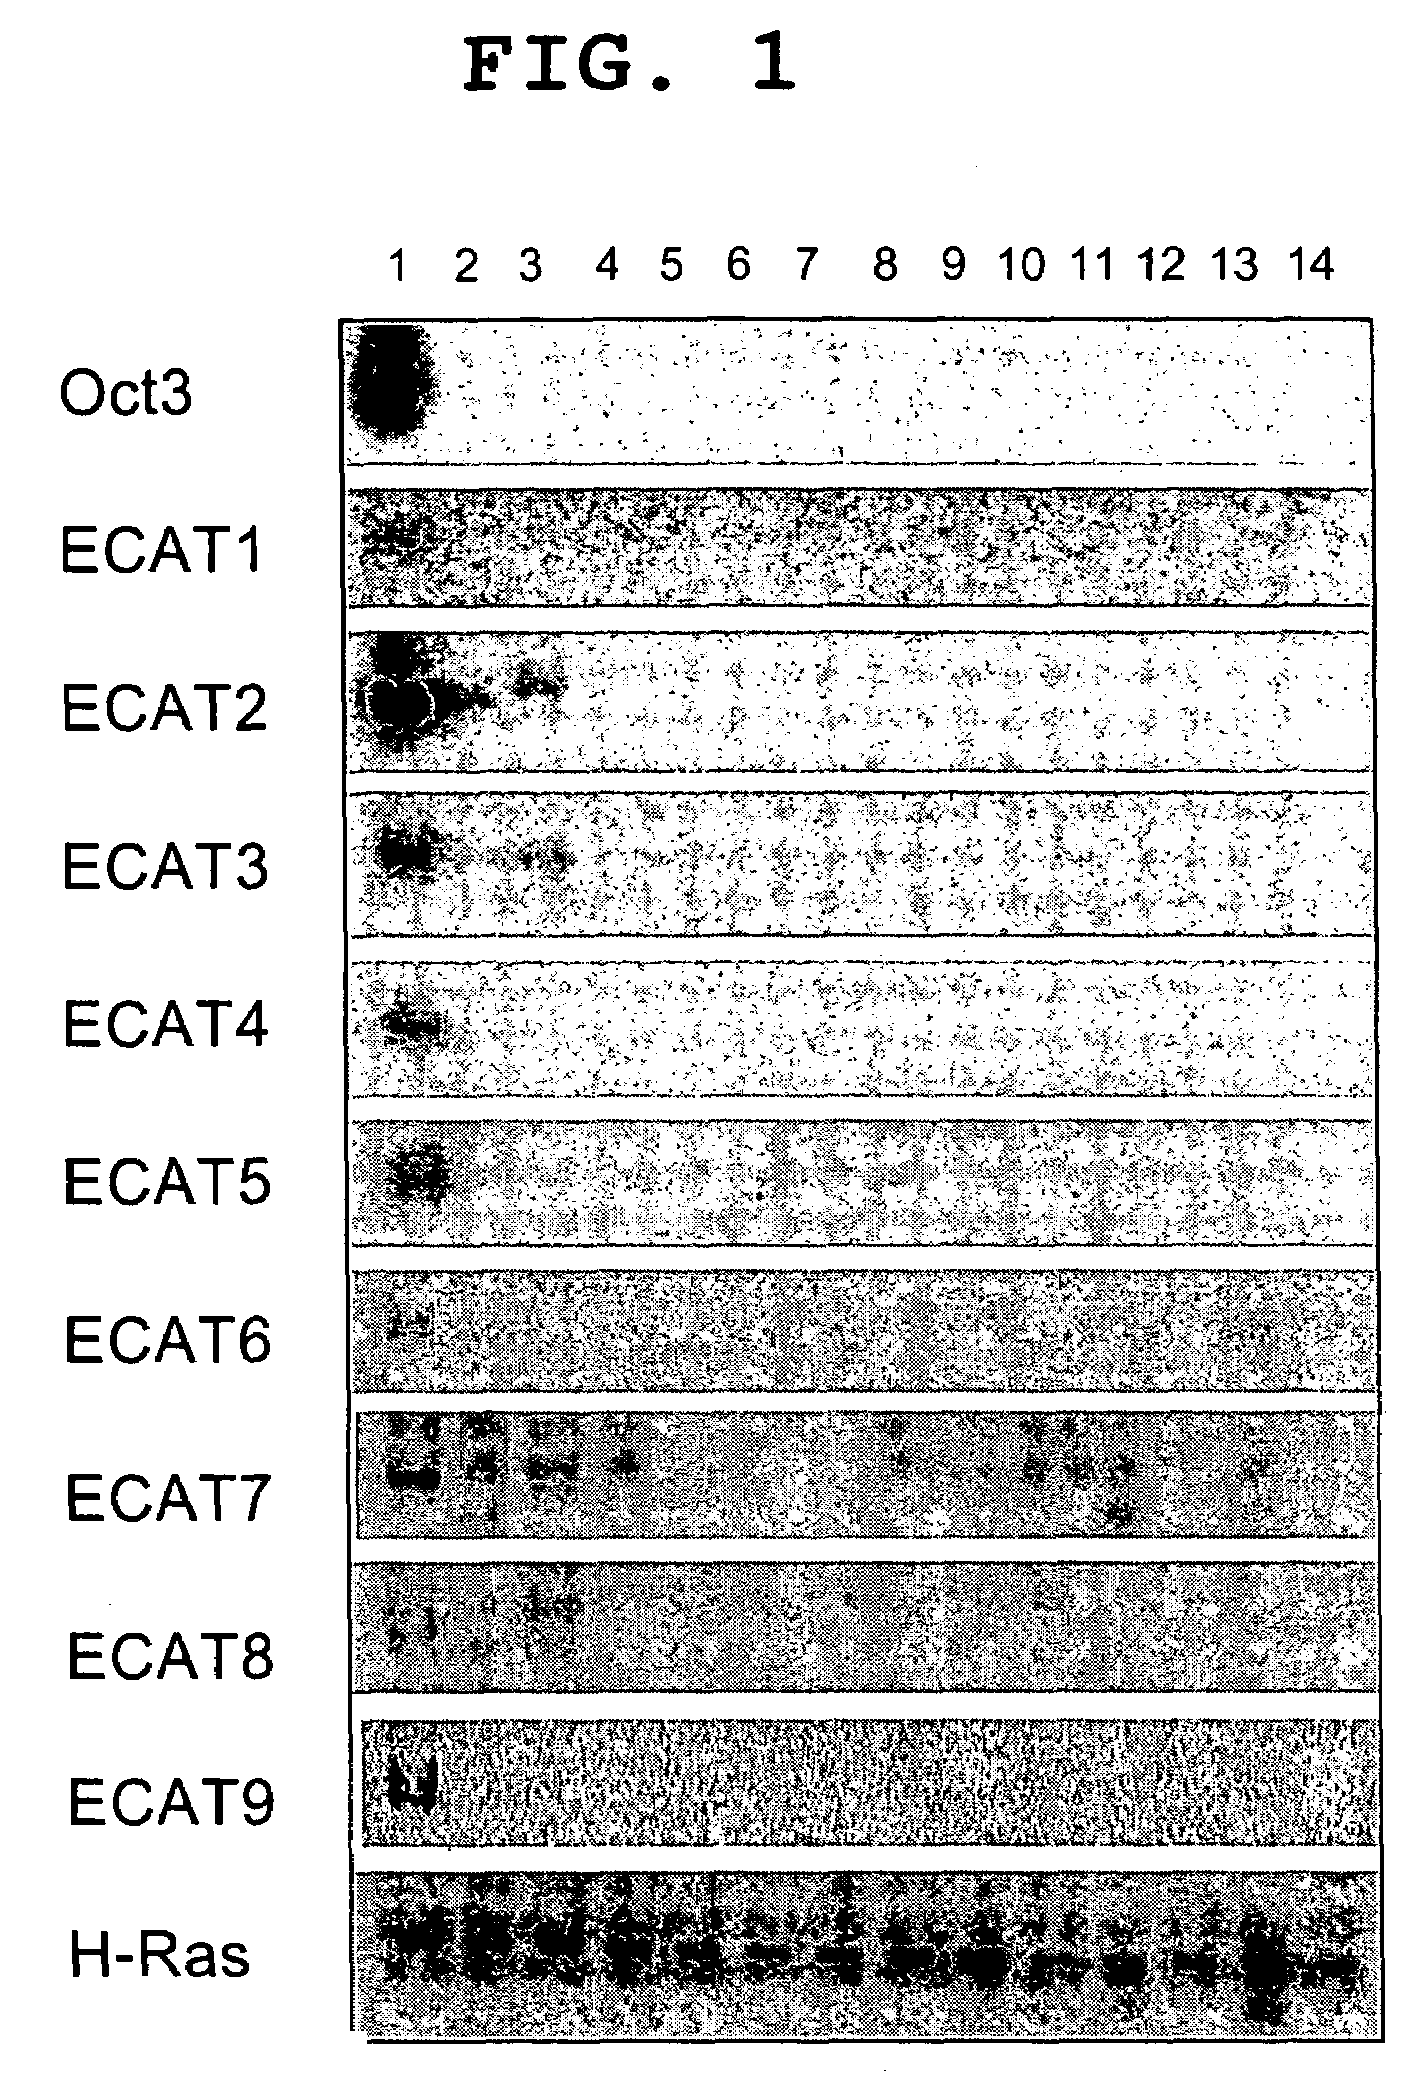 Genes with ES cell-specific expression